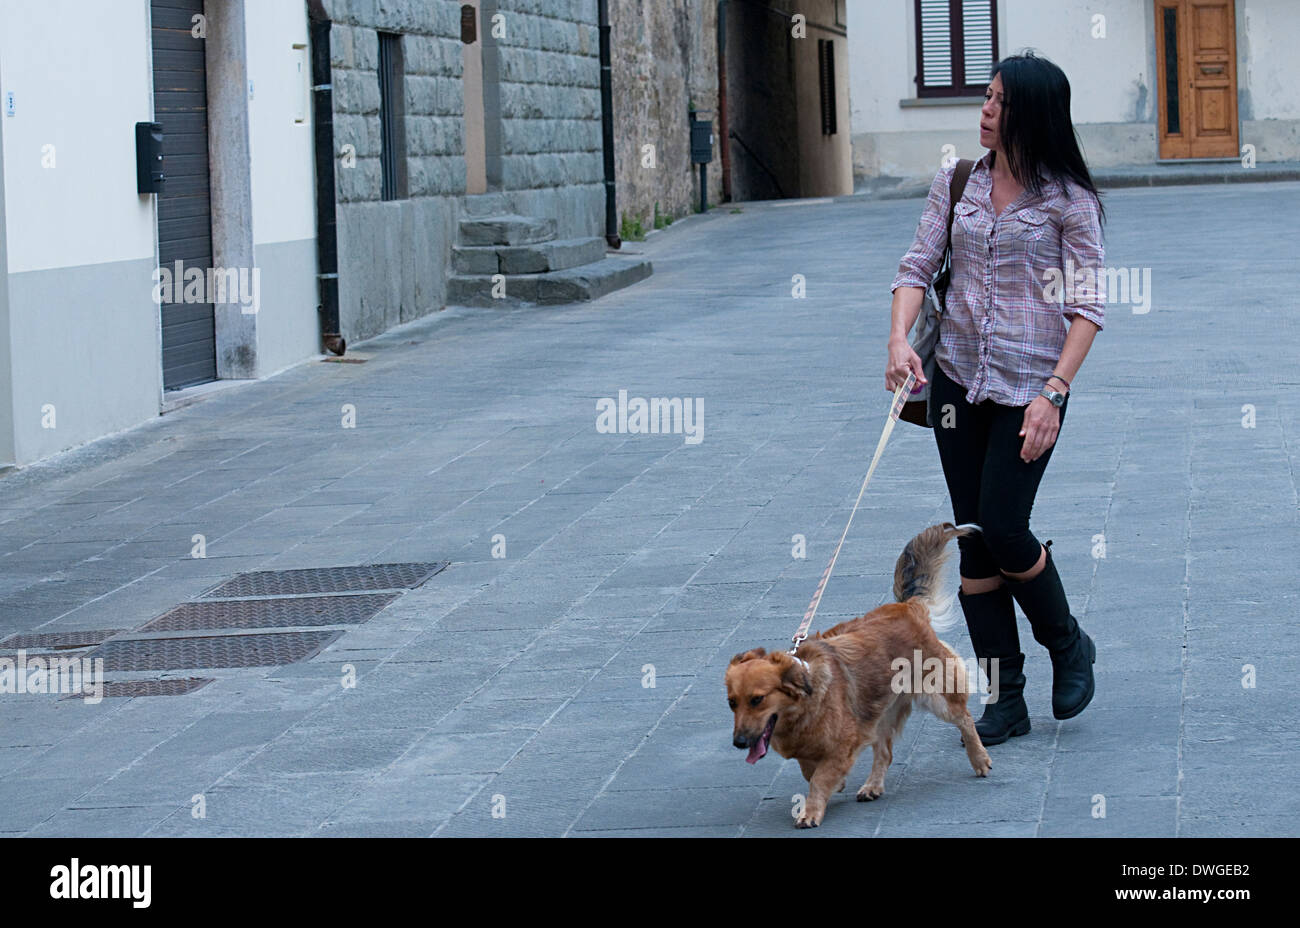 A young woman and her dog strolling through a deserted square in Lastra a Signa, Florence, Tuscany, Italy, Europe Stock Photo